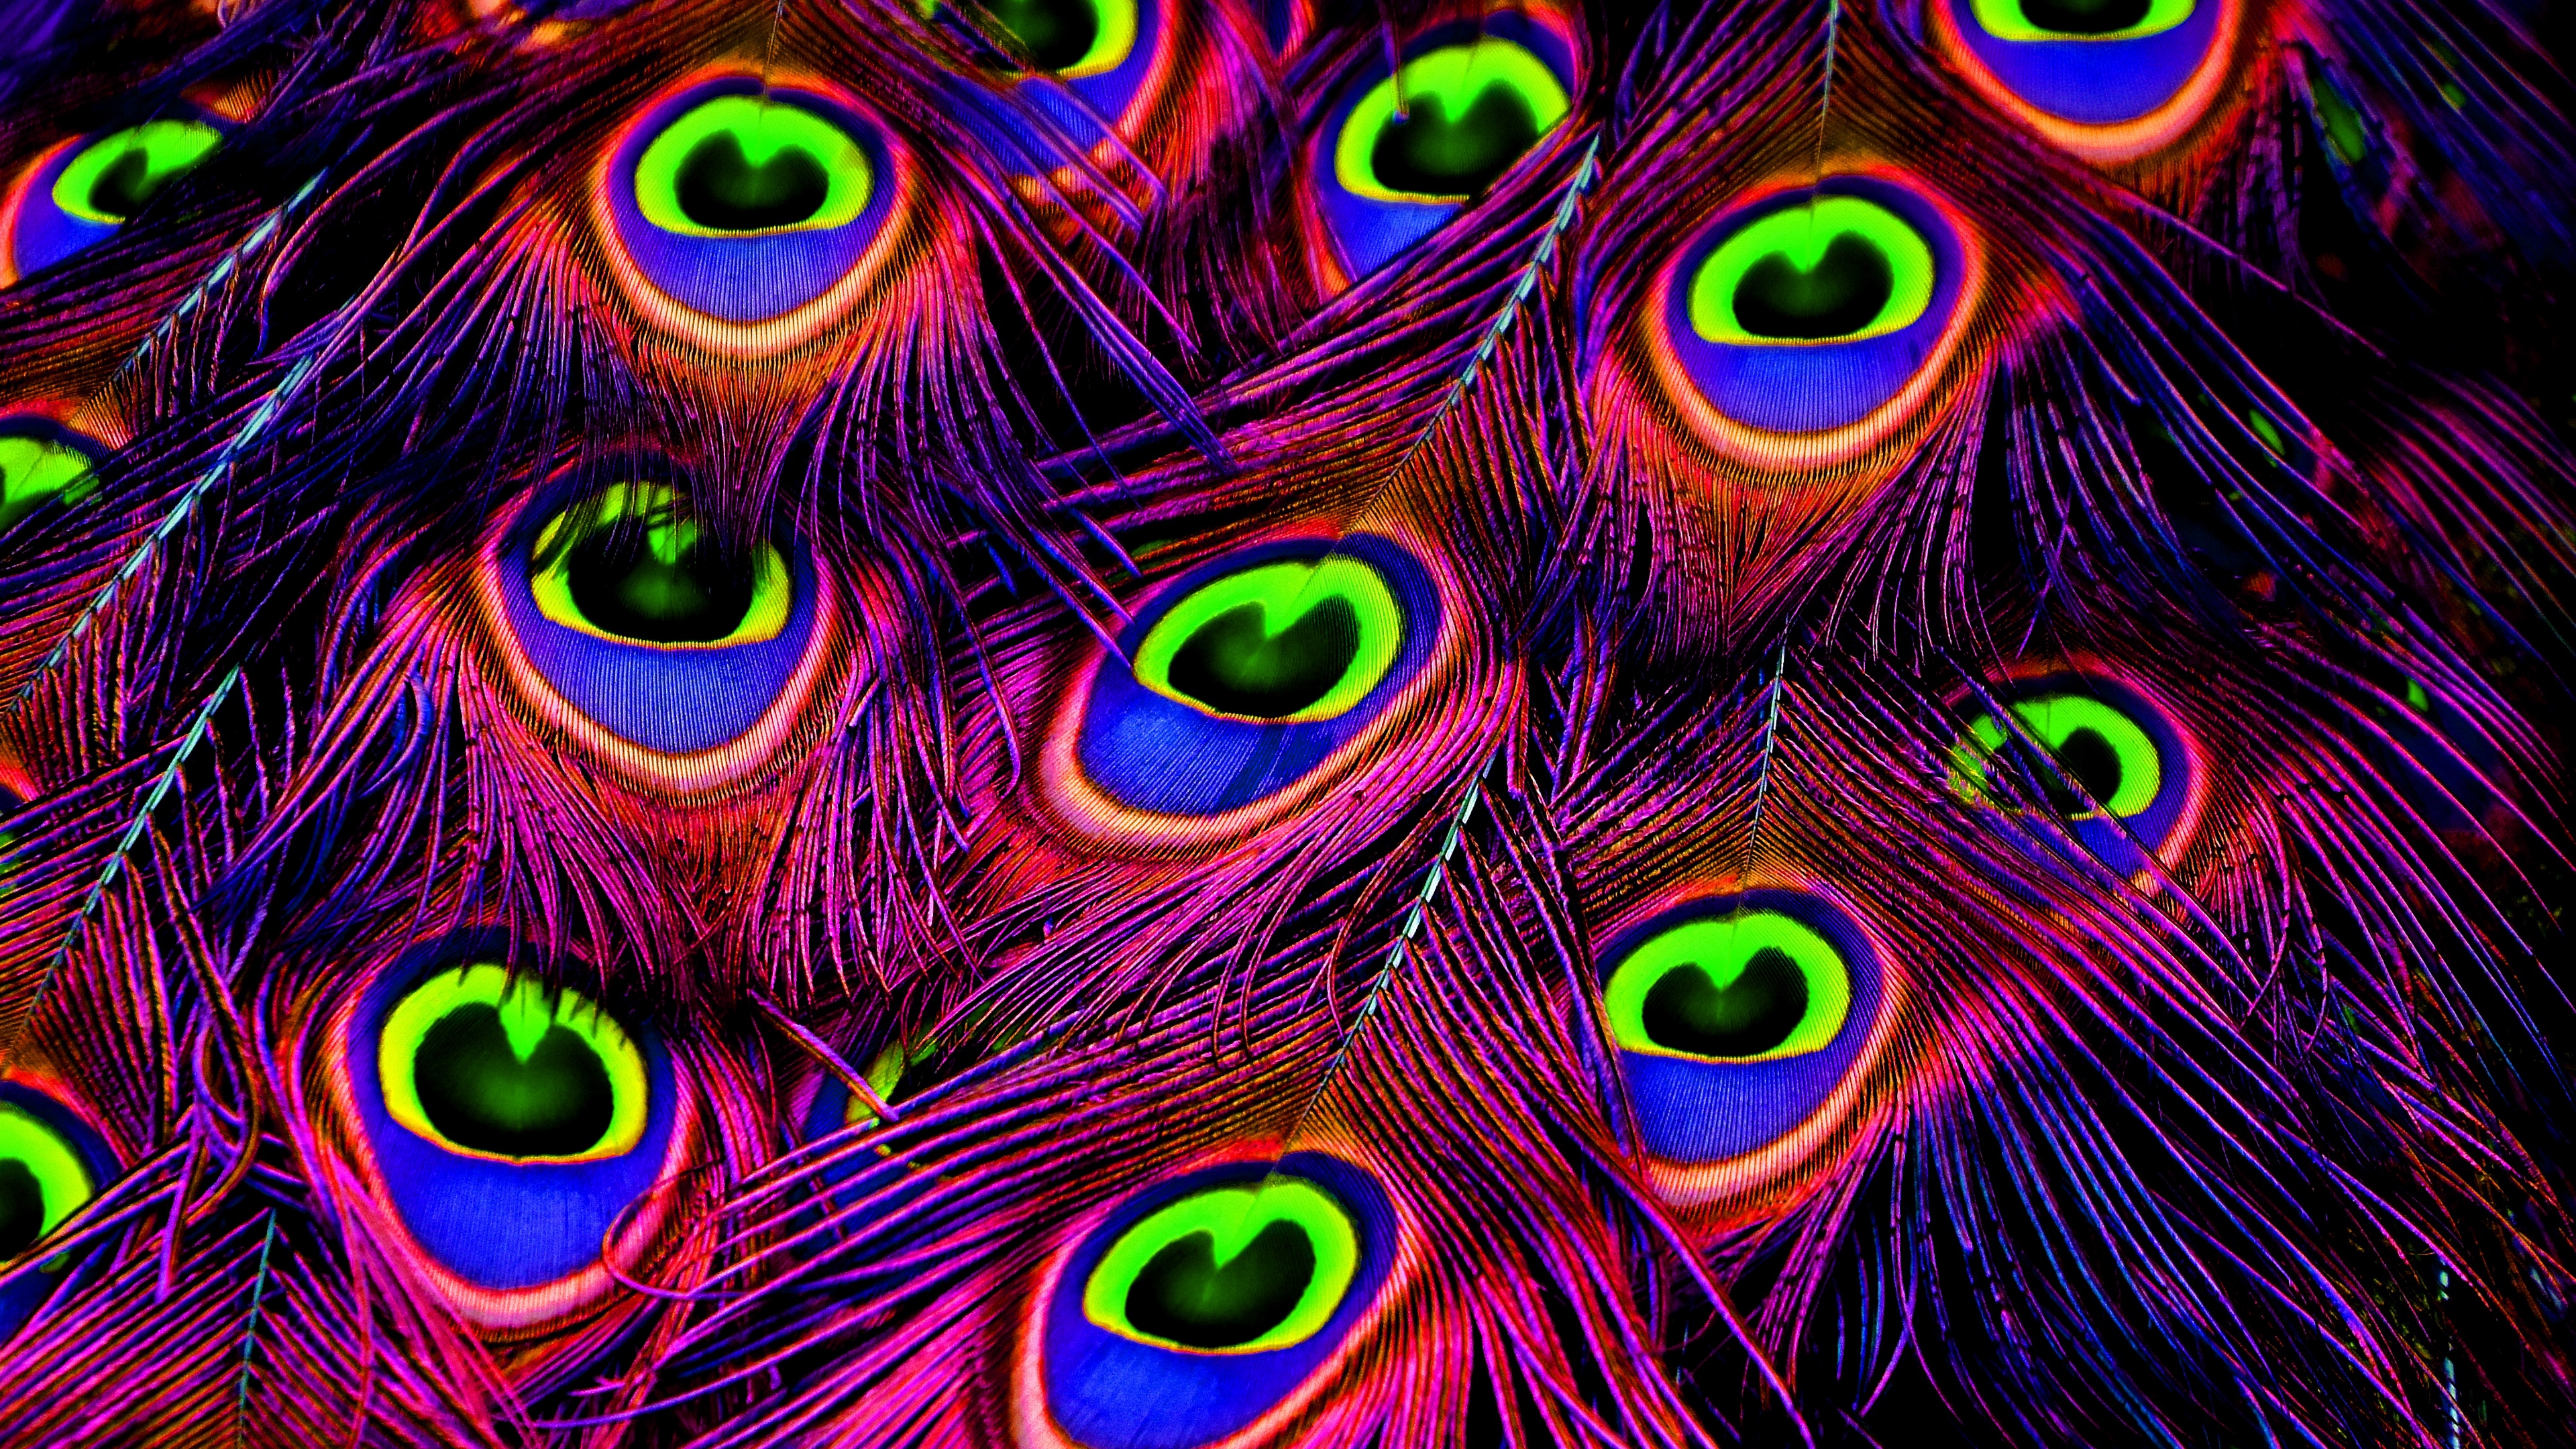 Wallpaper Peacock, Feathers, Bright, Photoshop - Peacock Feather - HD Wallpaper 